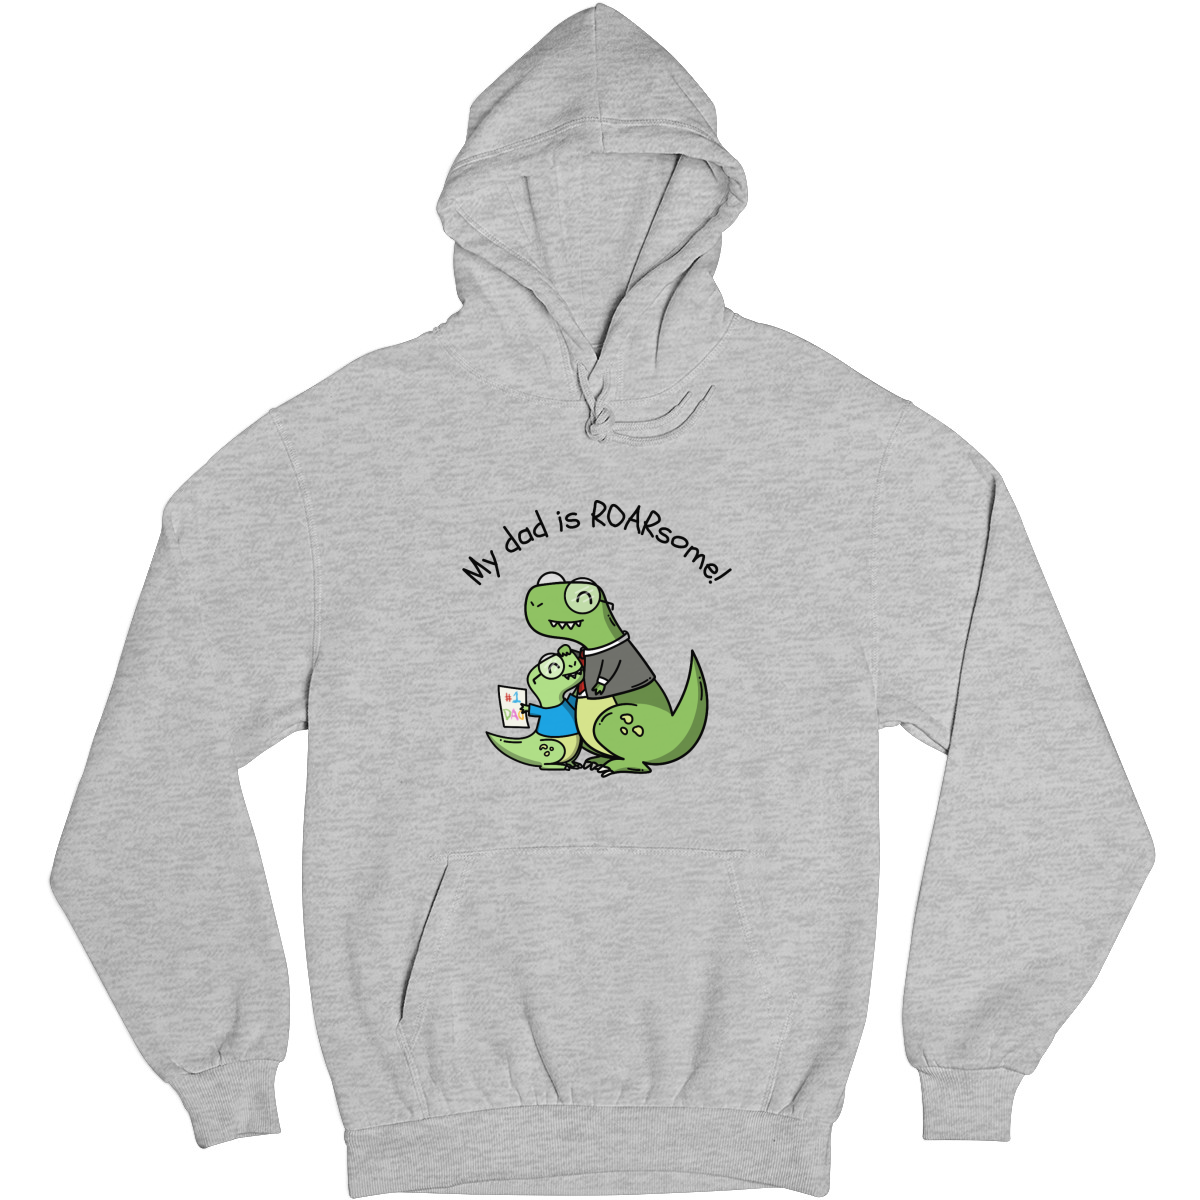 My dad is roarsome Unisex Hoodie | Gray